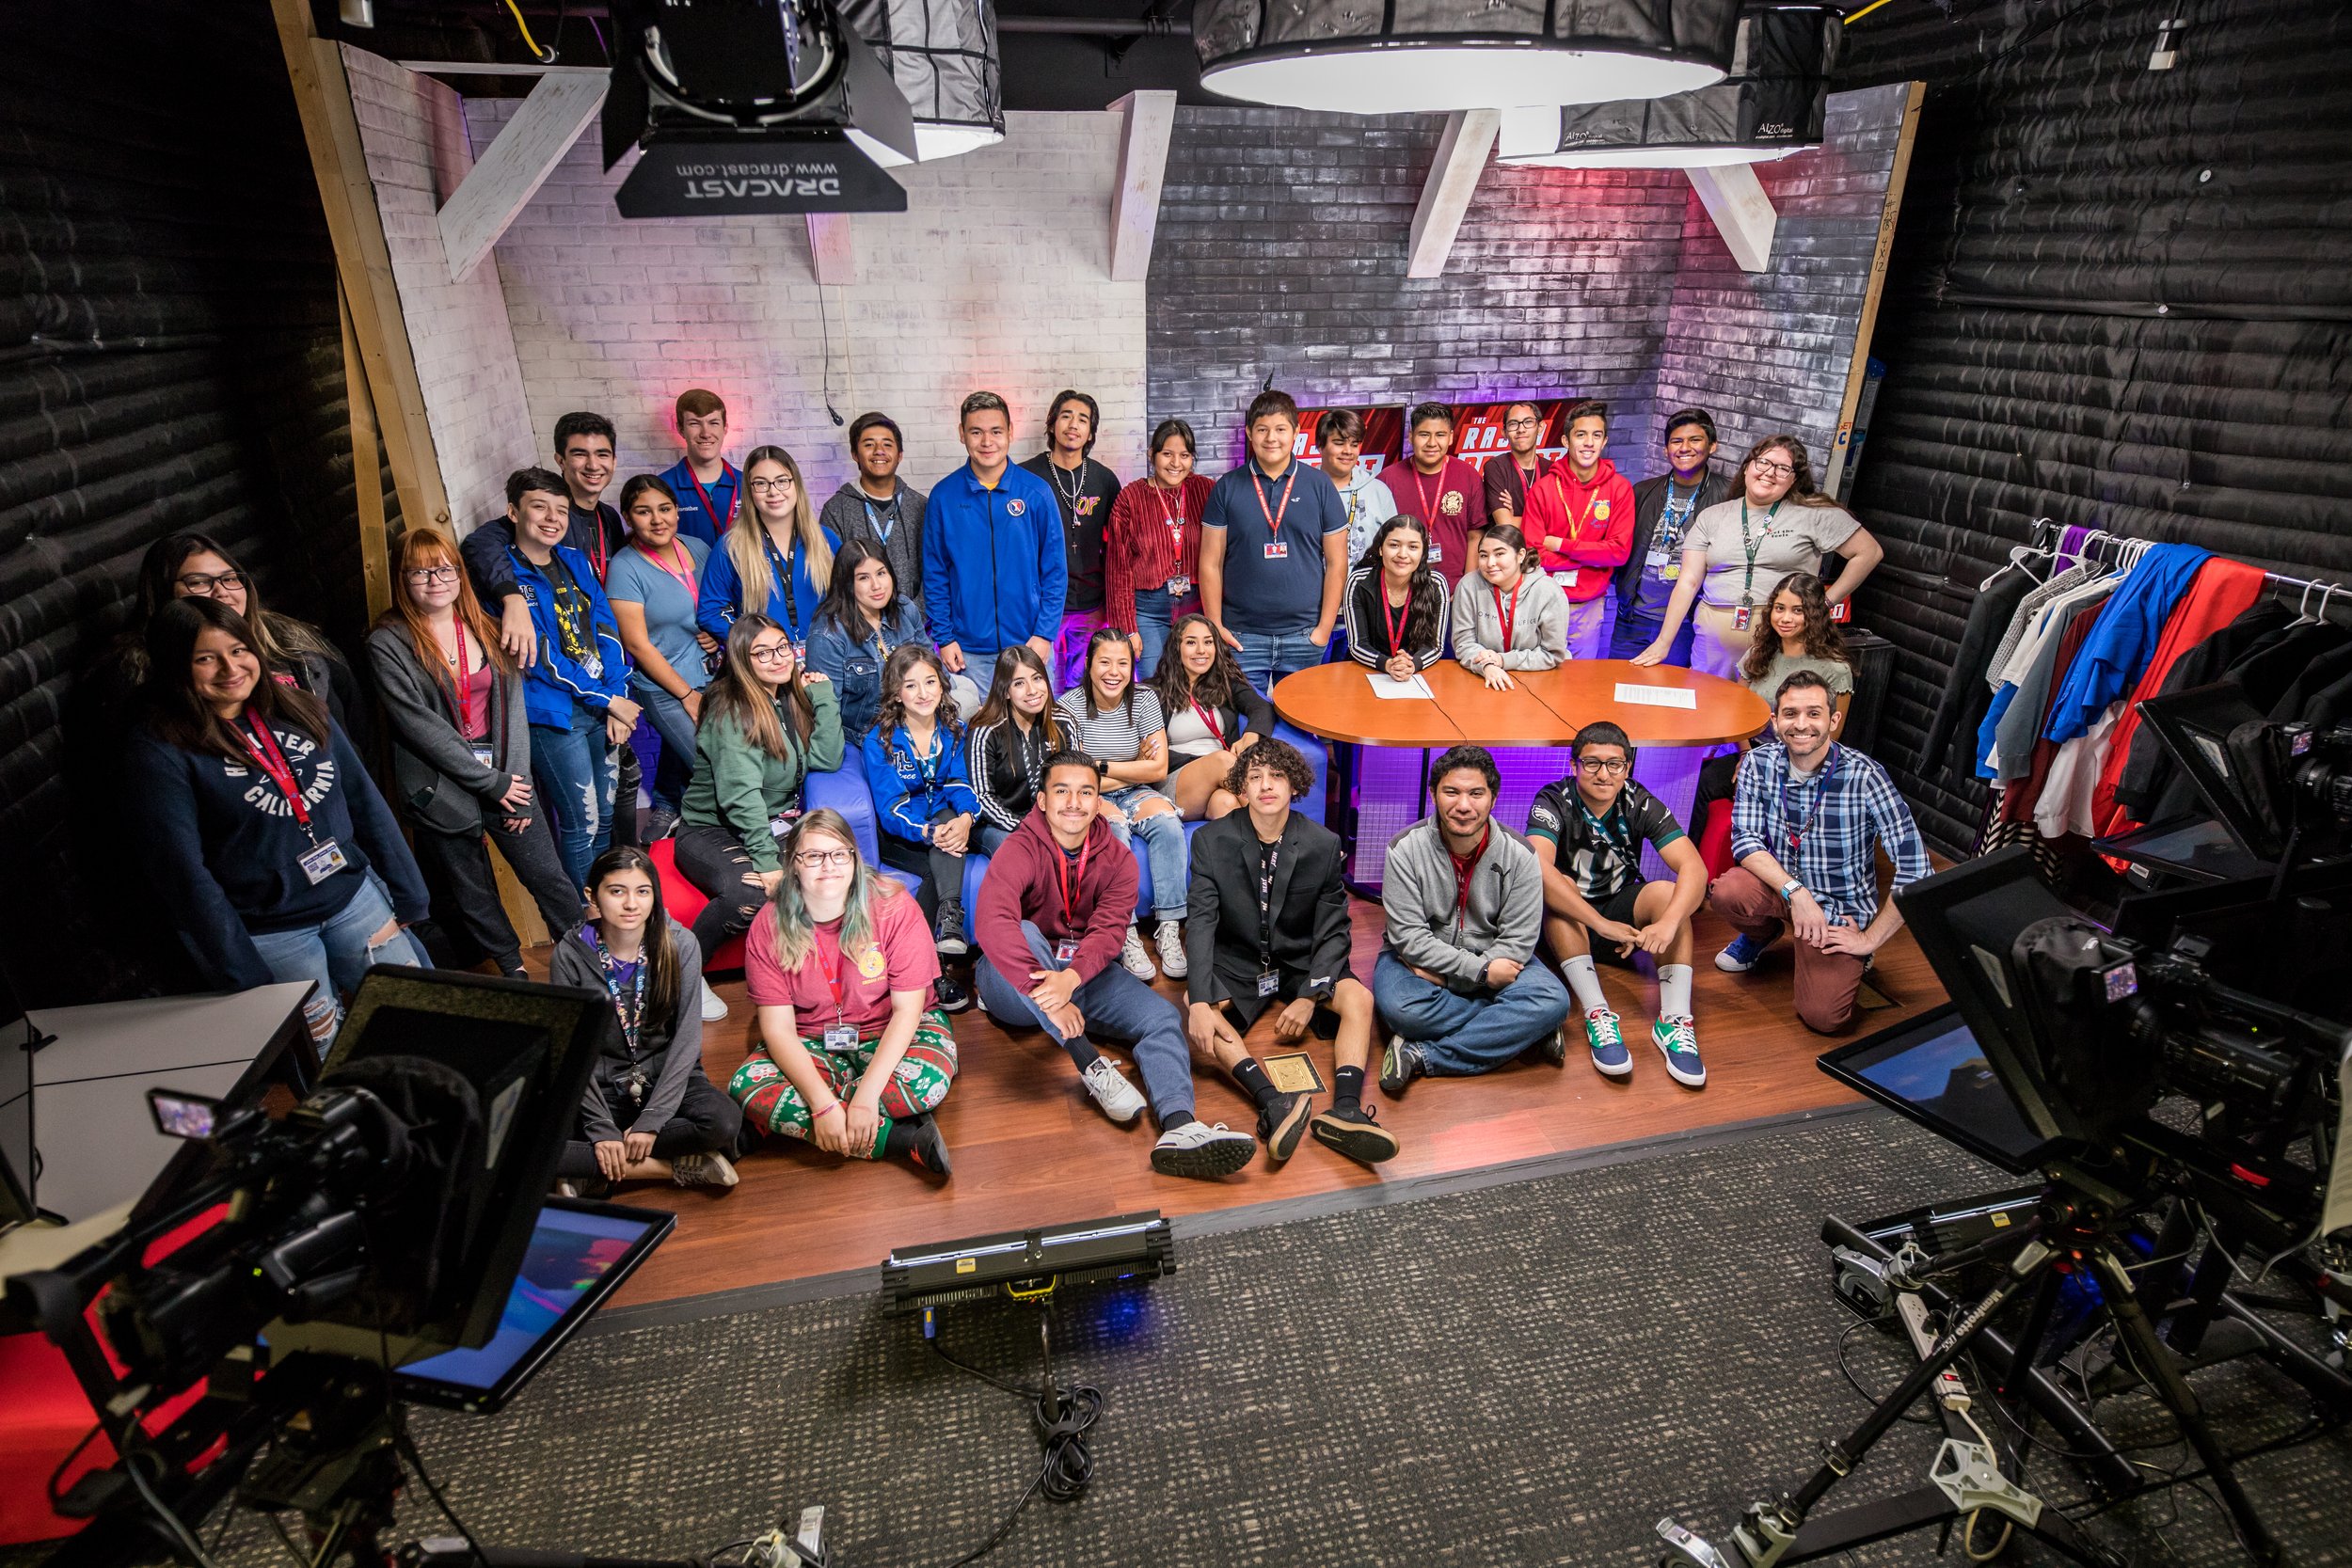  Even though there were usually only two anchors on screen, the Broadcast class was a huge team.  